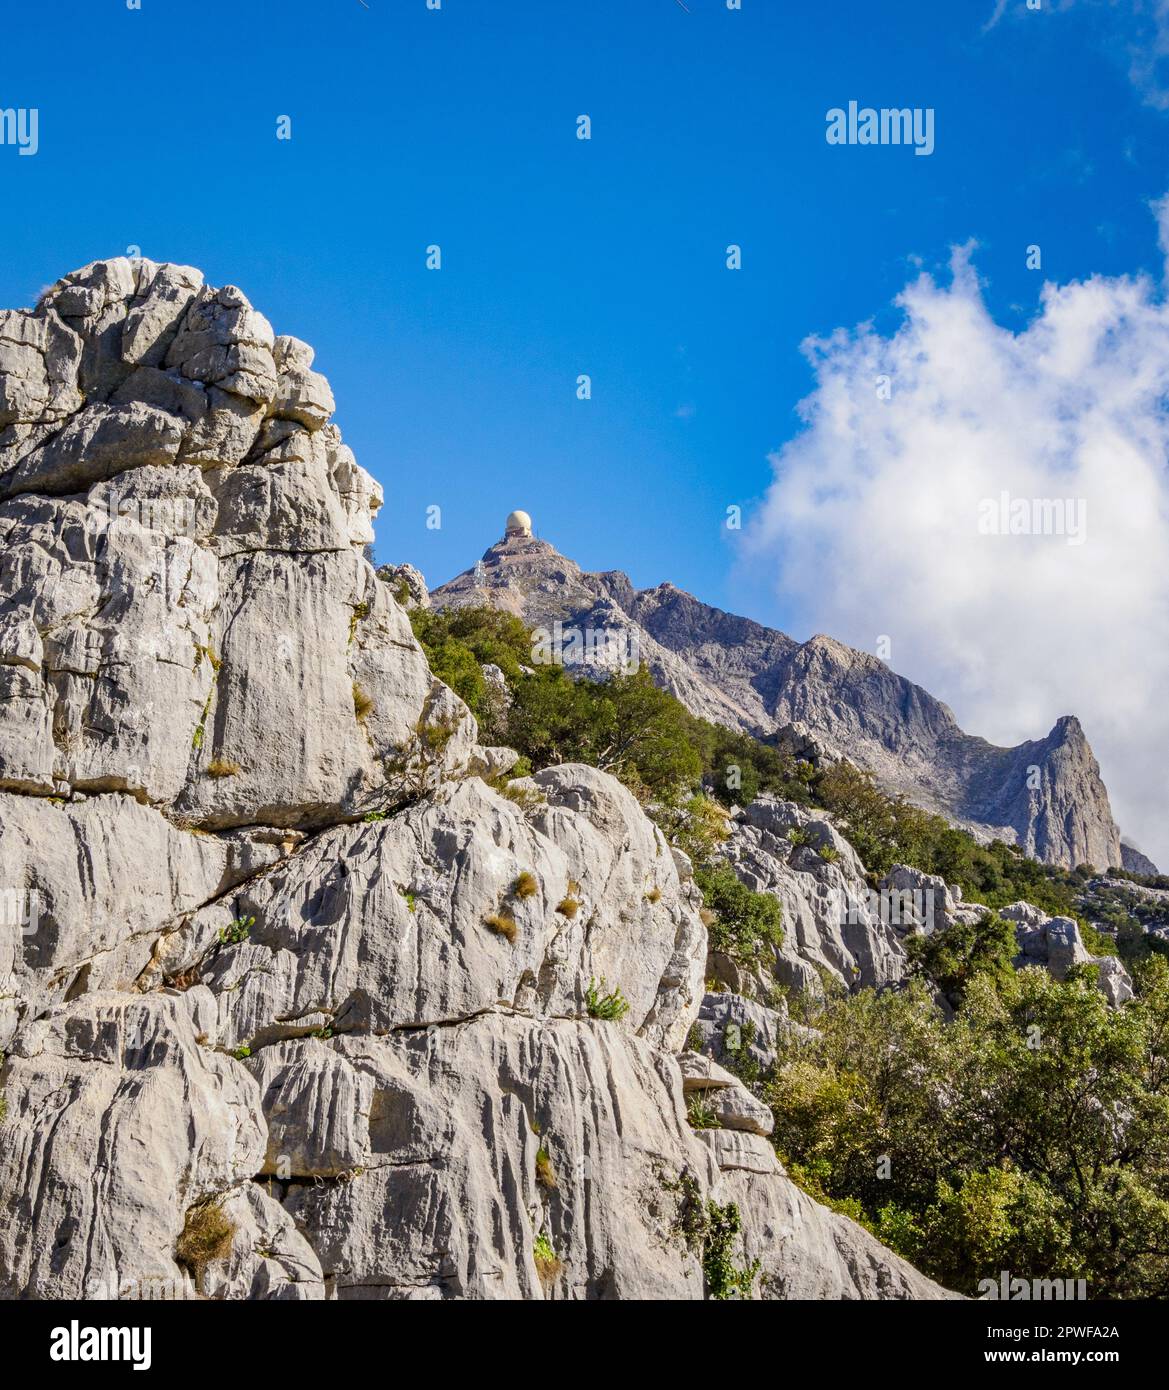 Puig Major the highest peak of the Serra de Tramuntana mountains in Majorca Spain and its prominent US Air Force radar dome at the summit Stock Photo